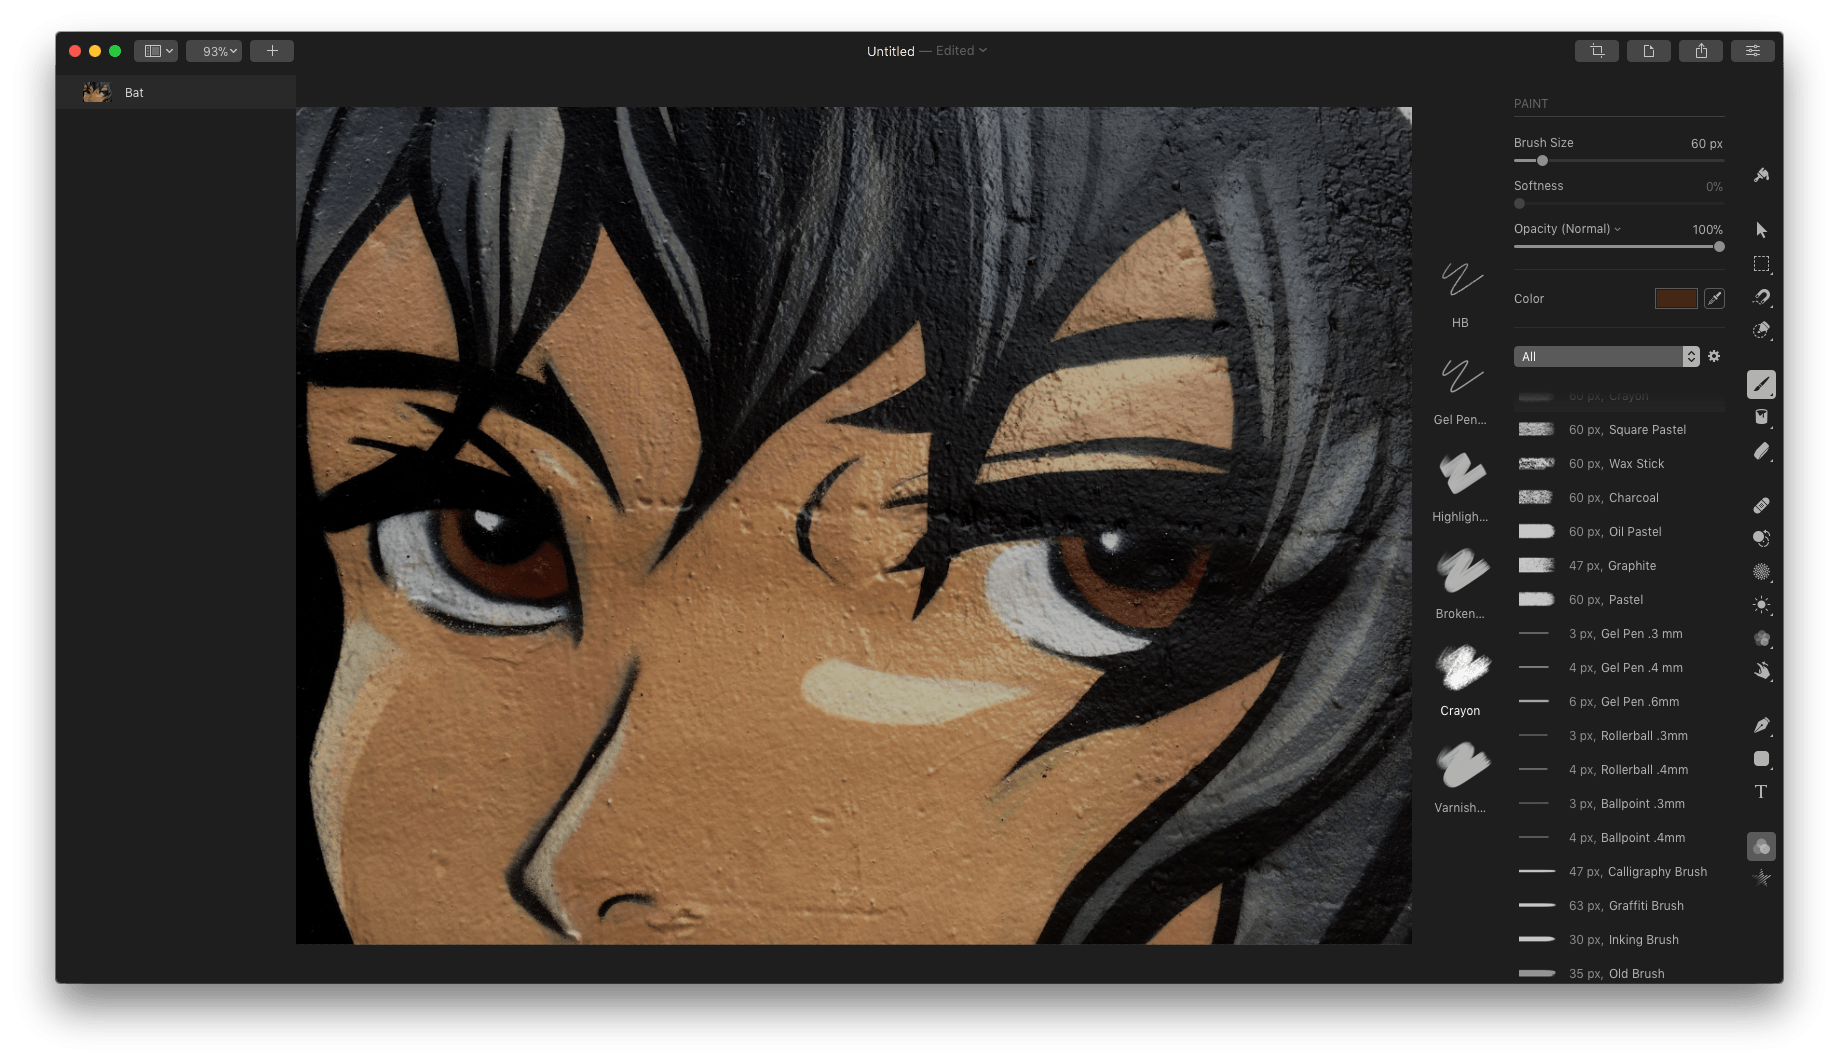 Pixelmator Pro includes a large number of customizable brushes for painting.